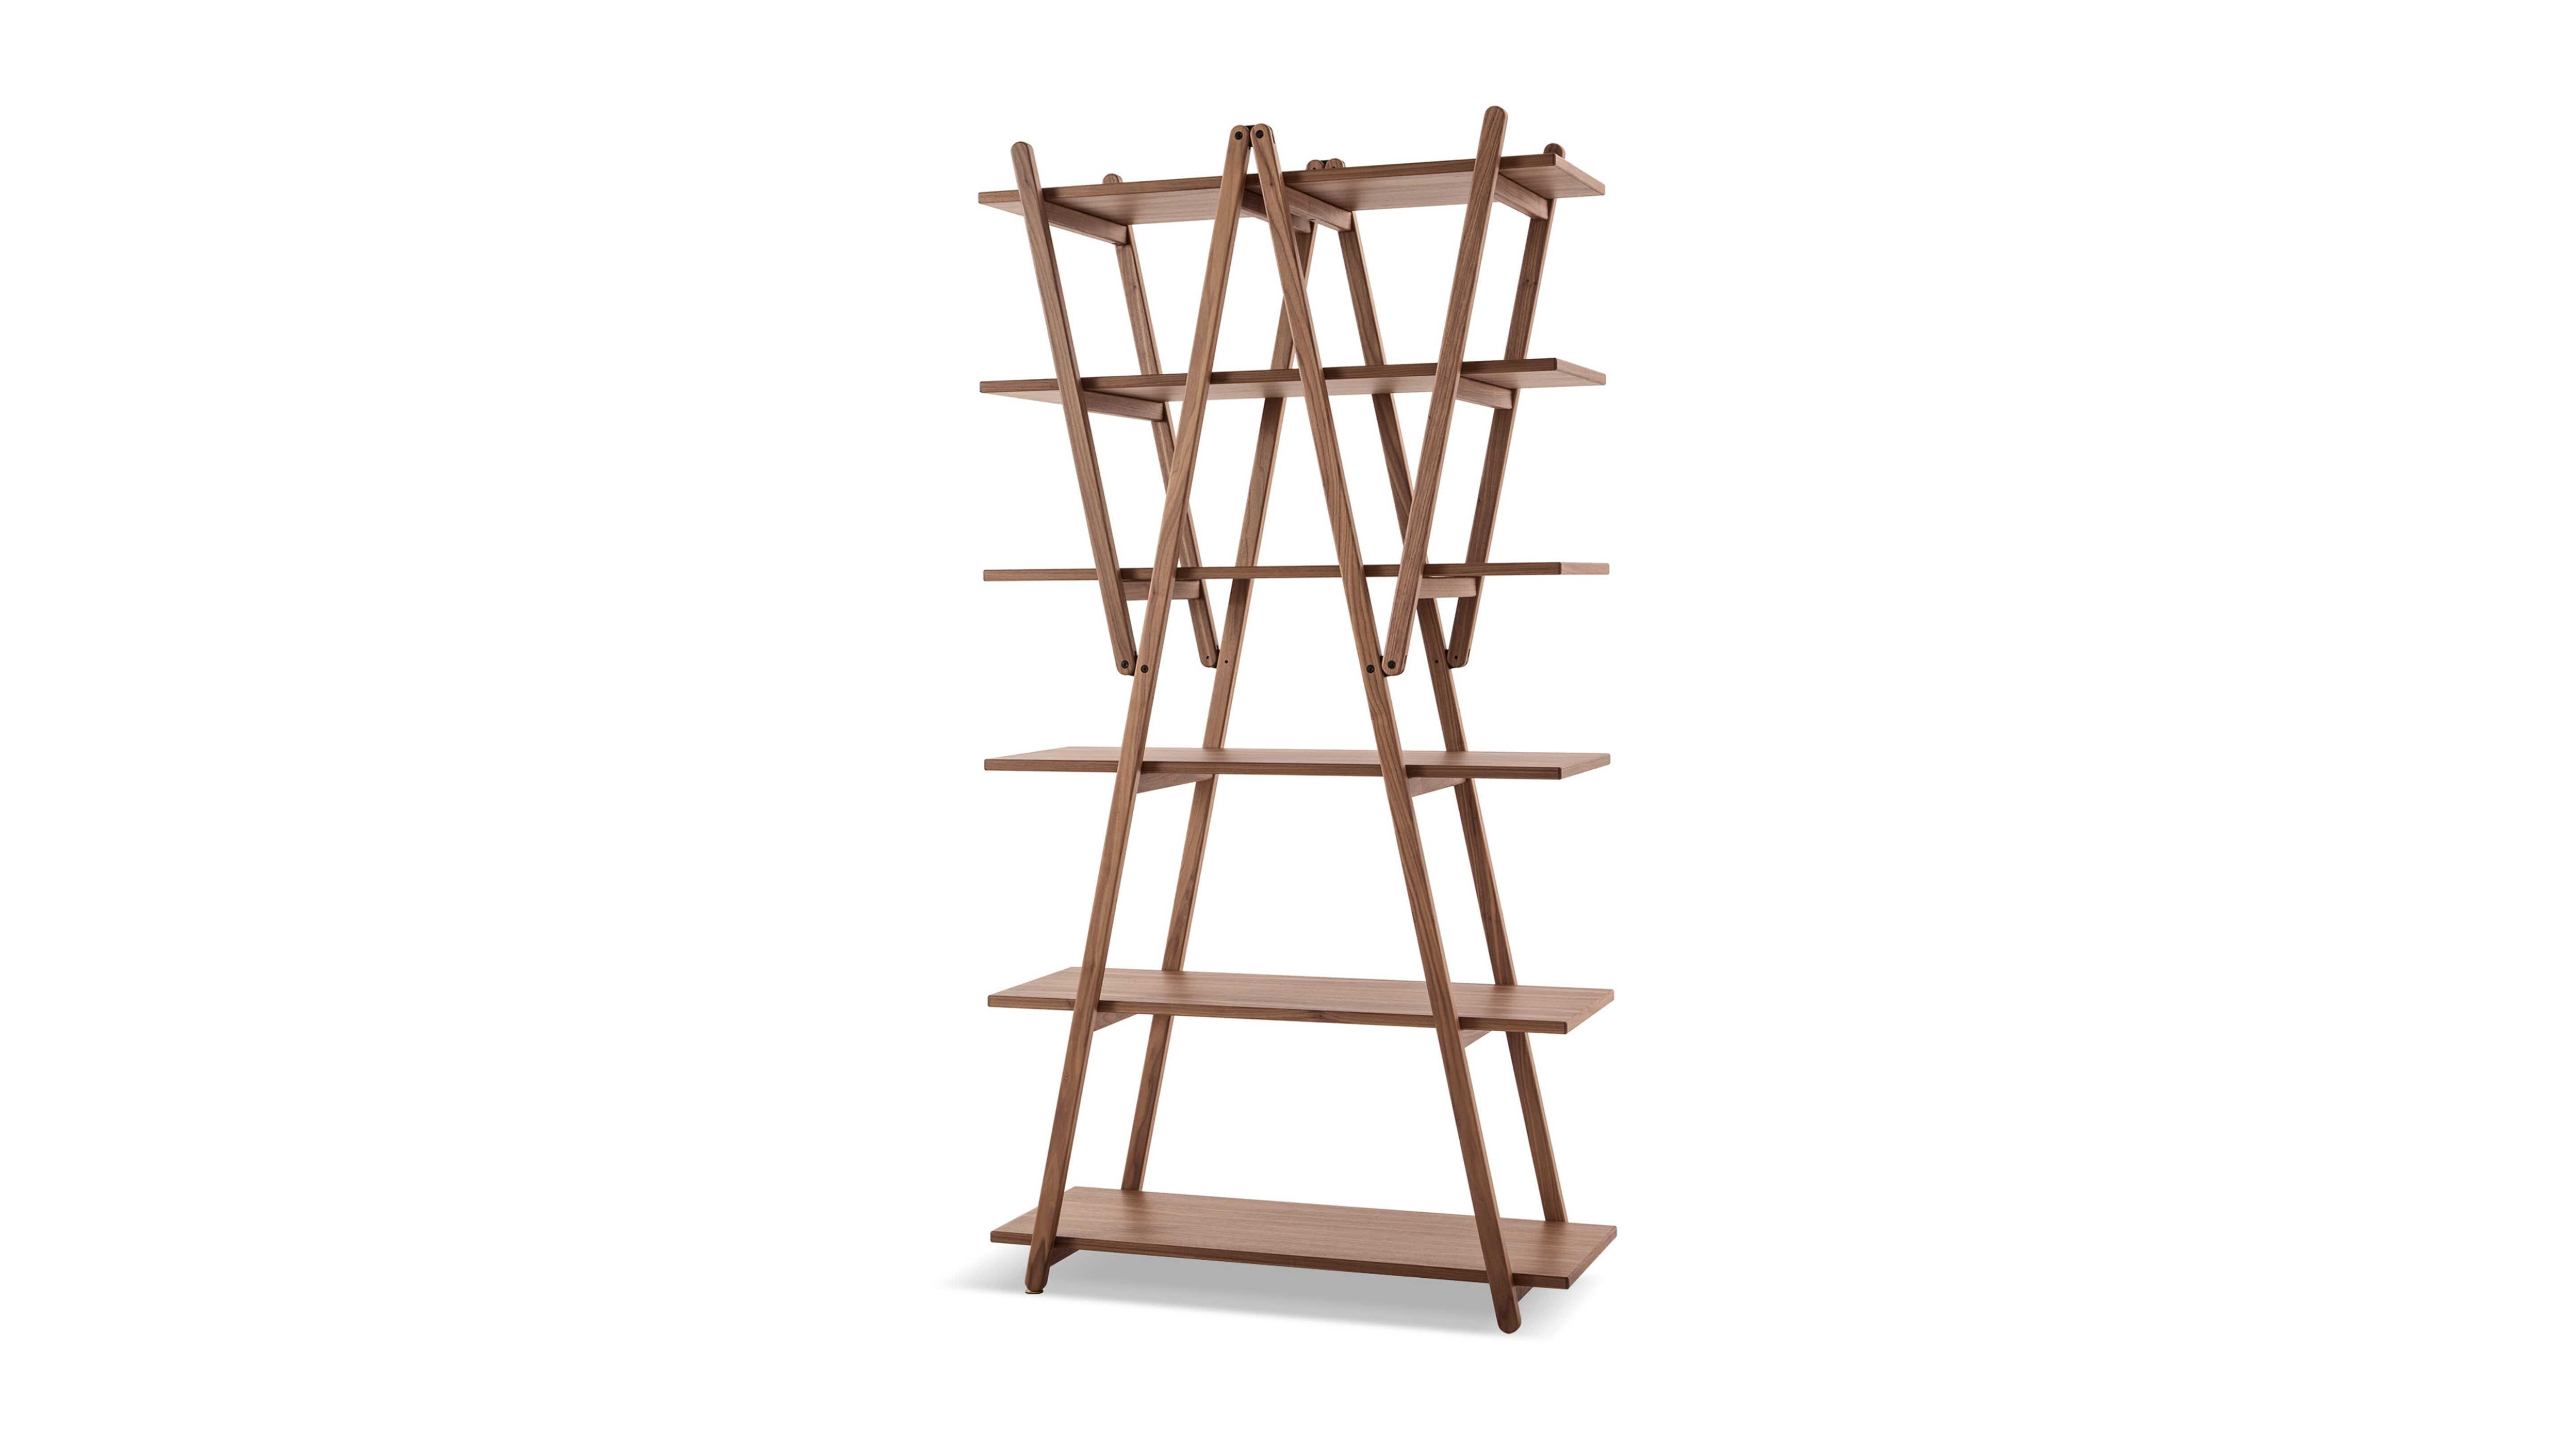 Prices vary dependent on the chosen material. Please get in touch. 

Available in: 
LACQUERED RED BEECHWOOD
LACQUERED WHITE BEECHWOOD
LACQUERED BLACK BEECHWOOD
NATURAL BEECHWOOD
AMERICAN WALNUT

Magistretti designed this folding bookcase with its